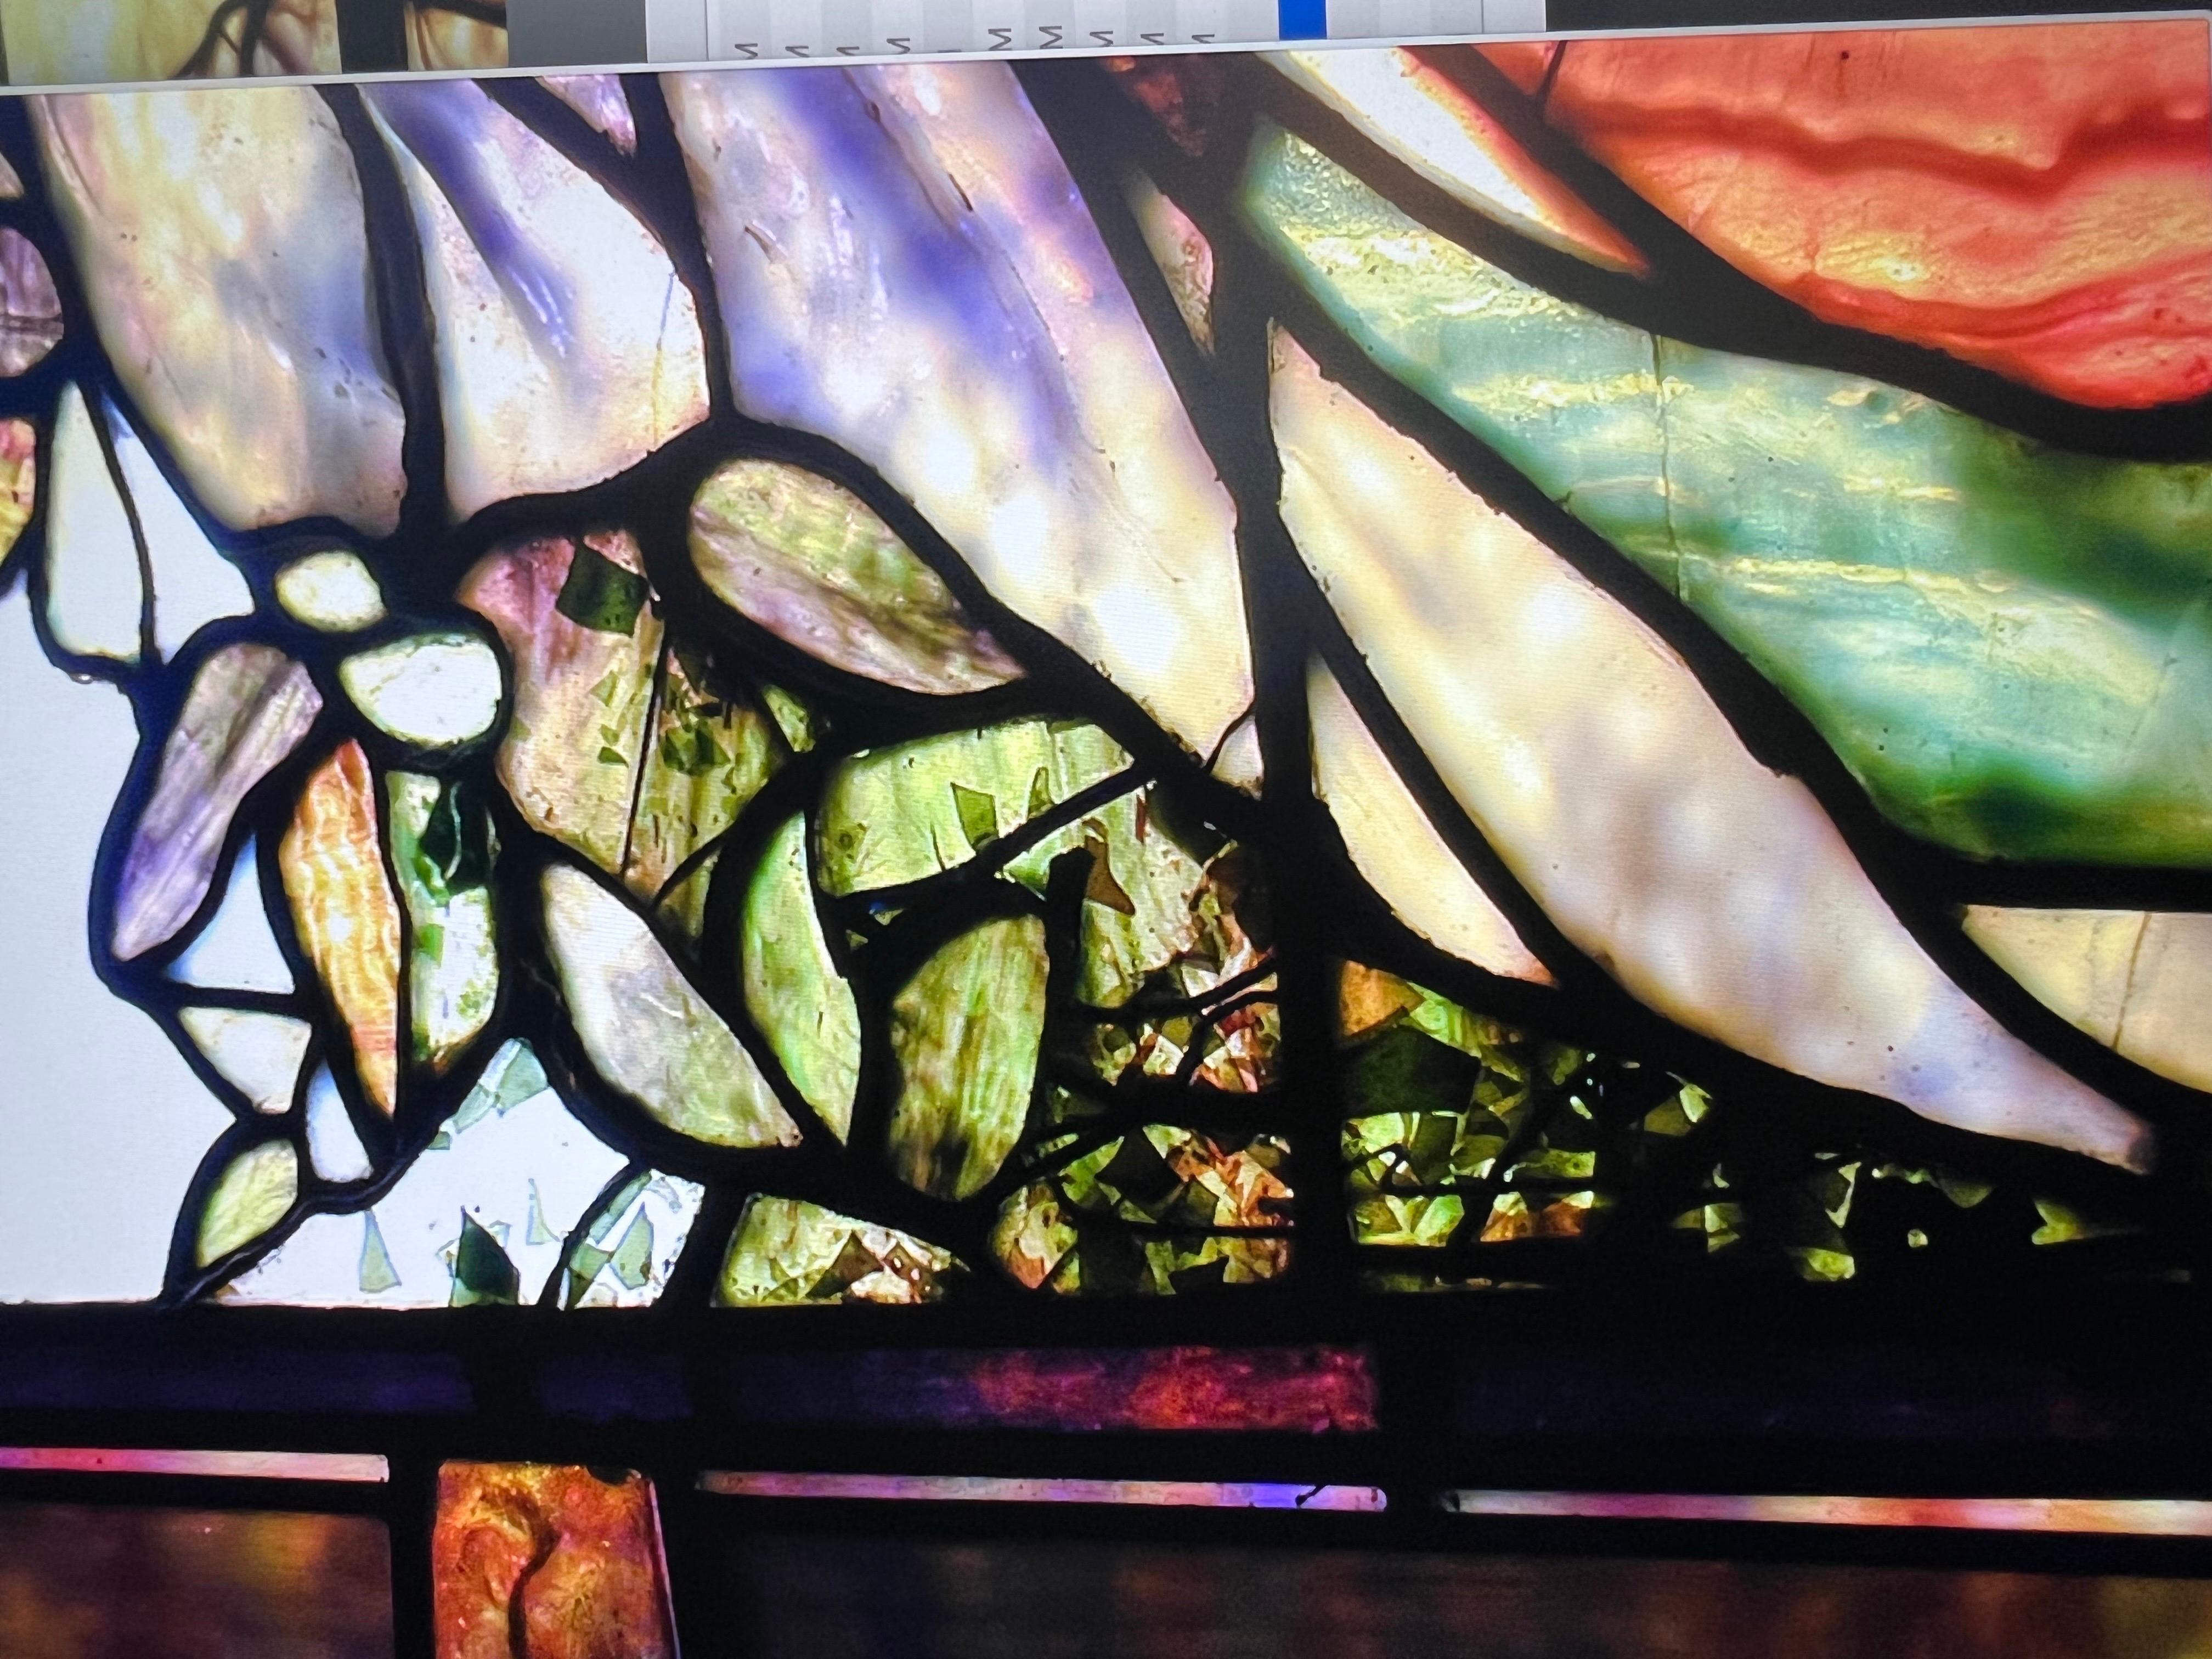 This beautiful window was purchased approximately 30 years ago for $35,000. It is a very nice example of Tiffany’s work during “Tiffany glass and decorating New York” during the late 1800s.

It is listed in the installations in the back of the